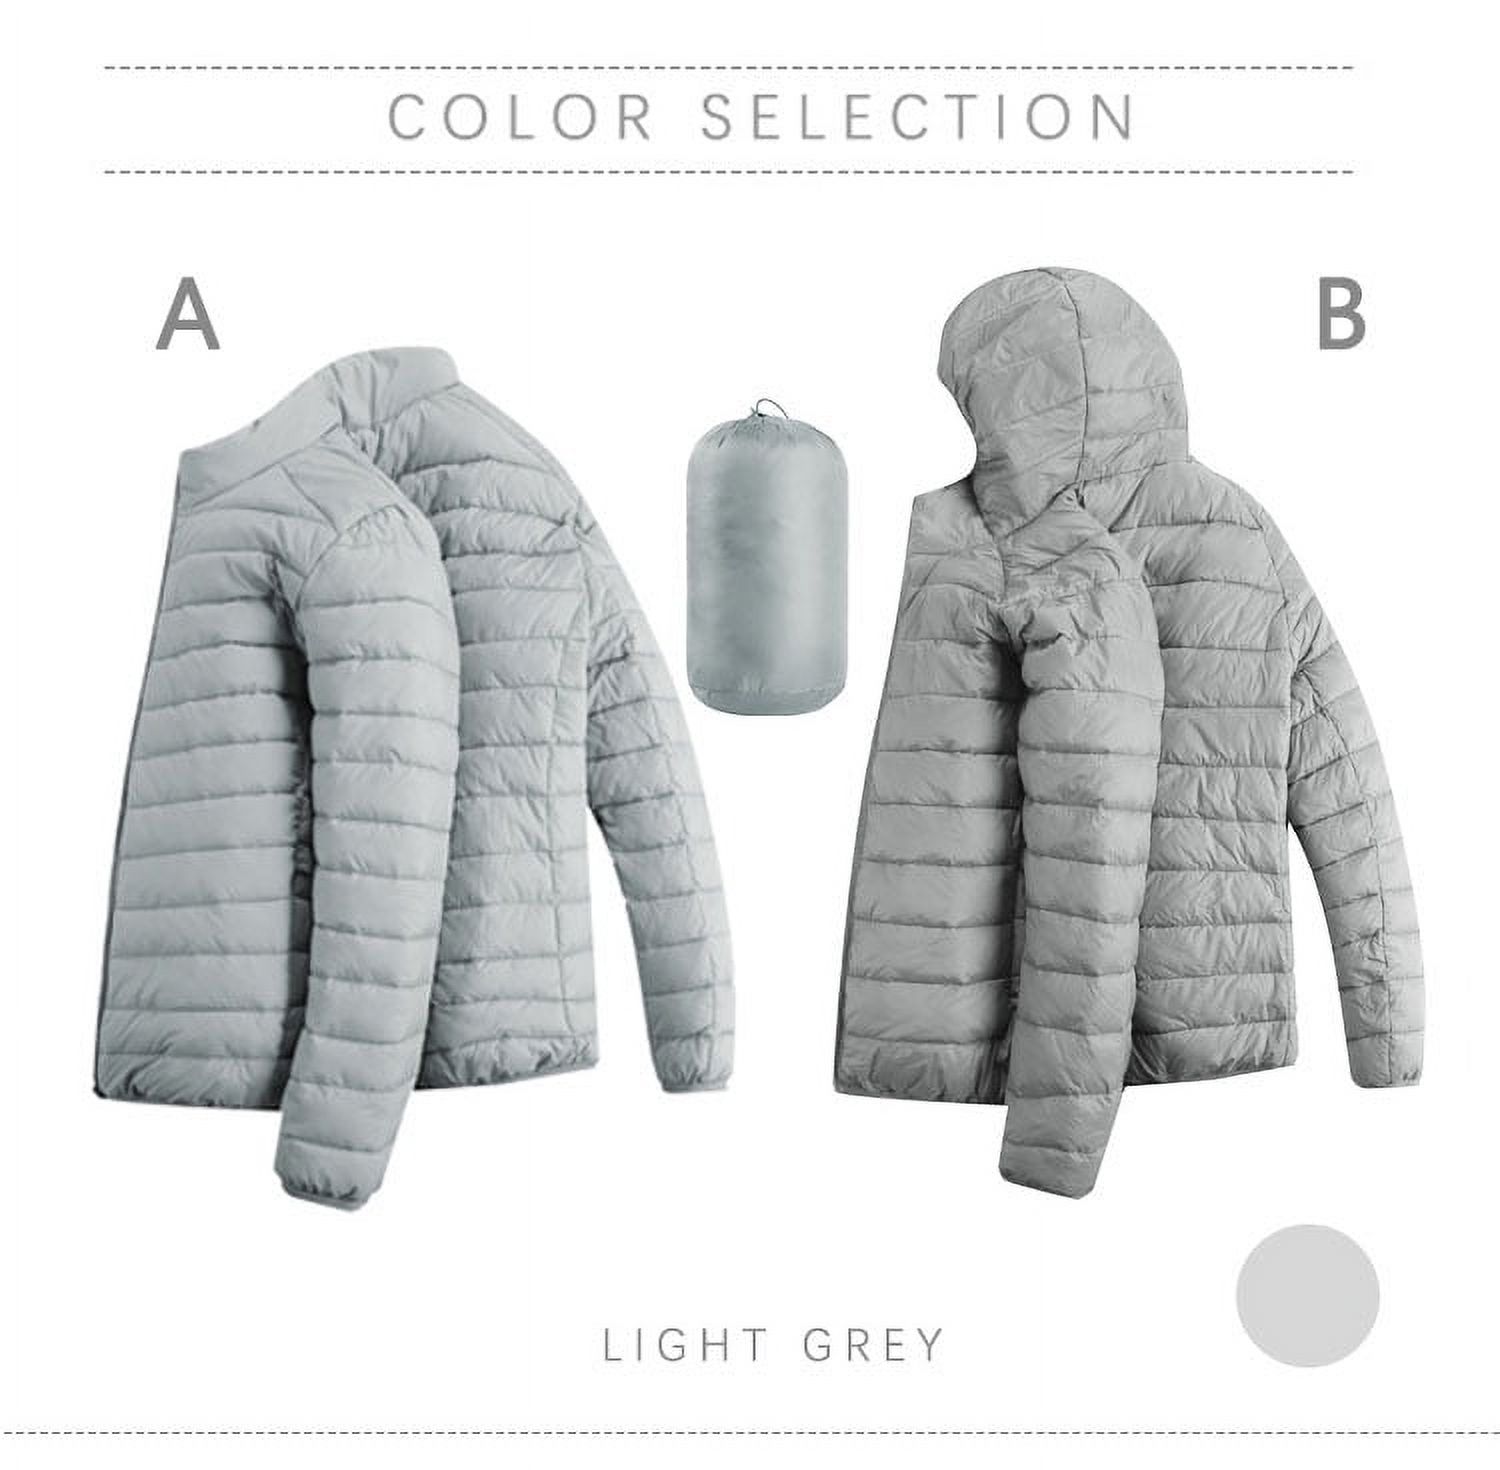 Packable Short Down Jacket Winter Puffer Coat Lightweight Quilted Down Parka Coat Hiking Outwear - image 3 of 4